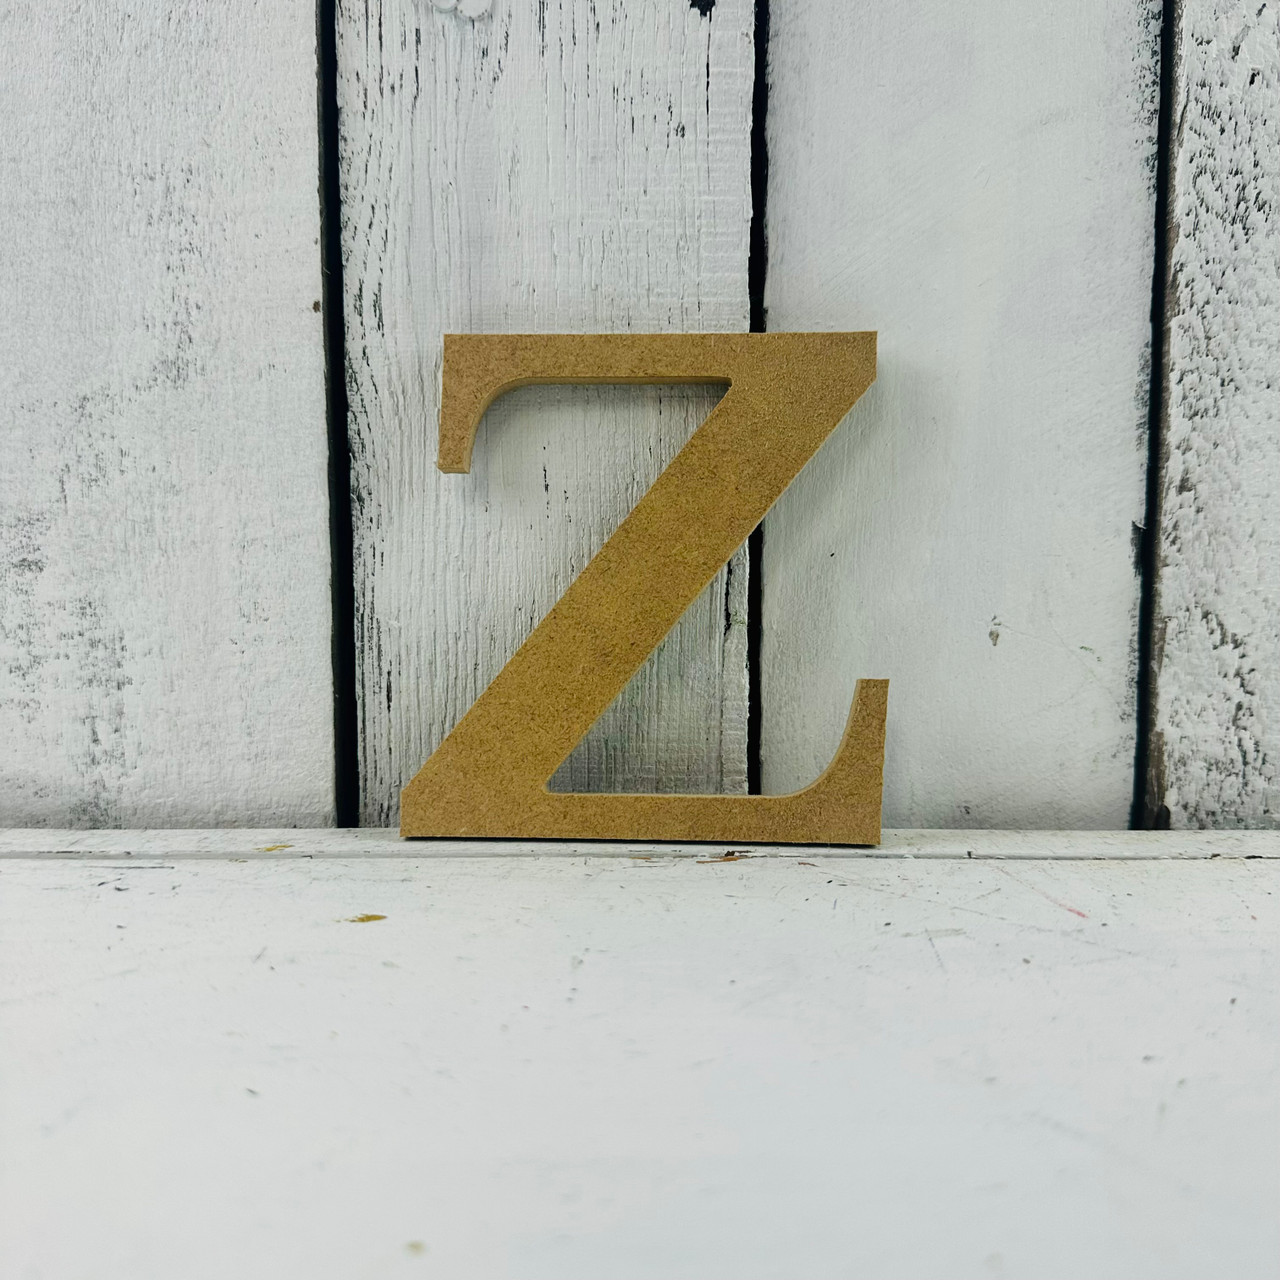 Online Wooden Letters and Numbers Unfinished Letters Cutout